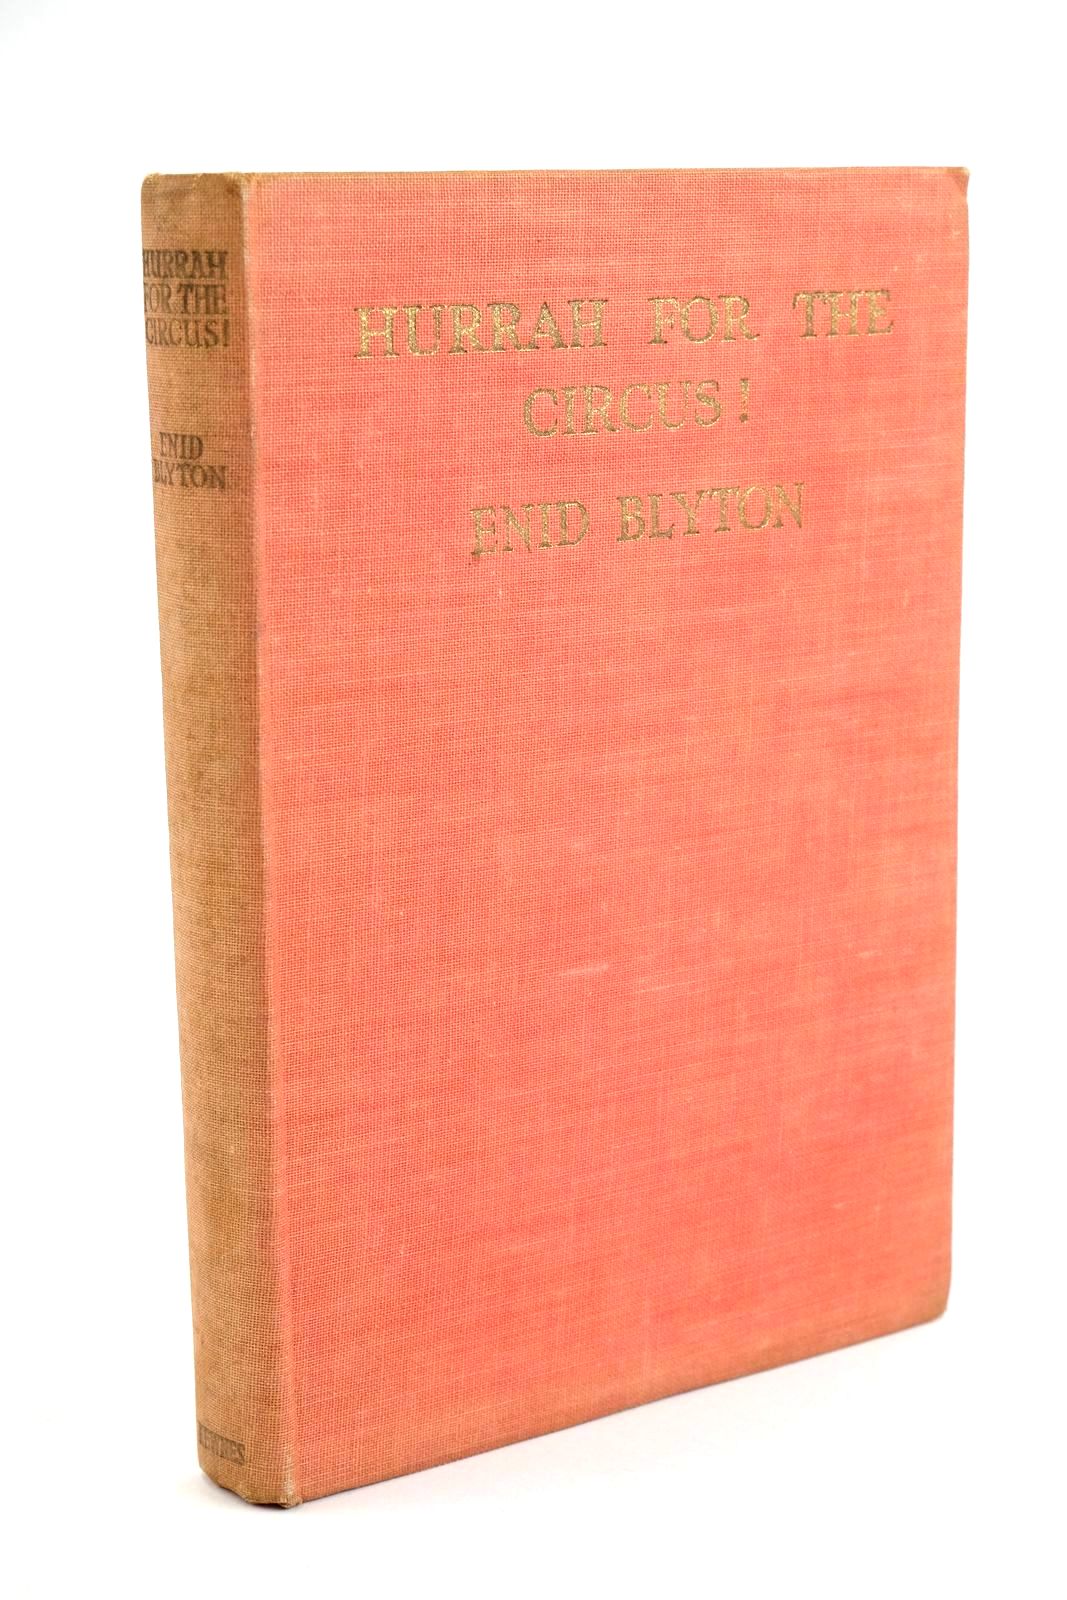 Photo of HURRAH FOR THE CIRCUS! written by Blyton, Enid illustrated by Davie, E.H. published by George Newnes Ltd. (STOCK CODE: 1323548)  for sale by Stella & Rose's Books